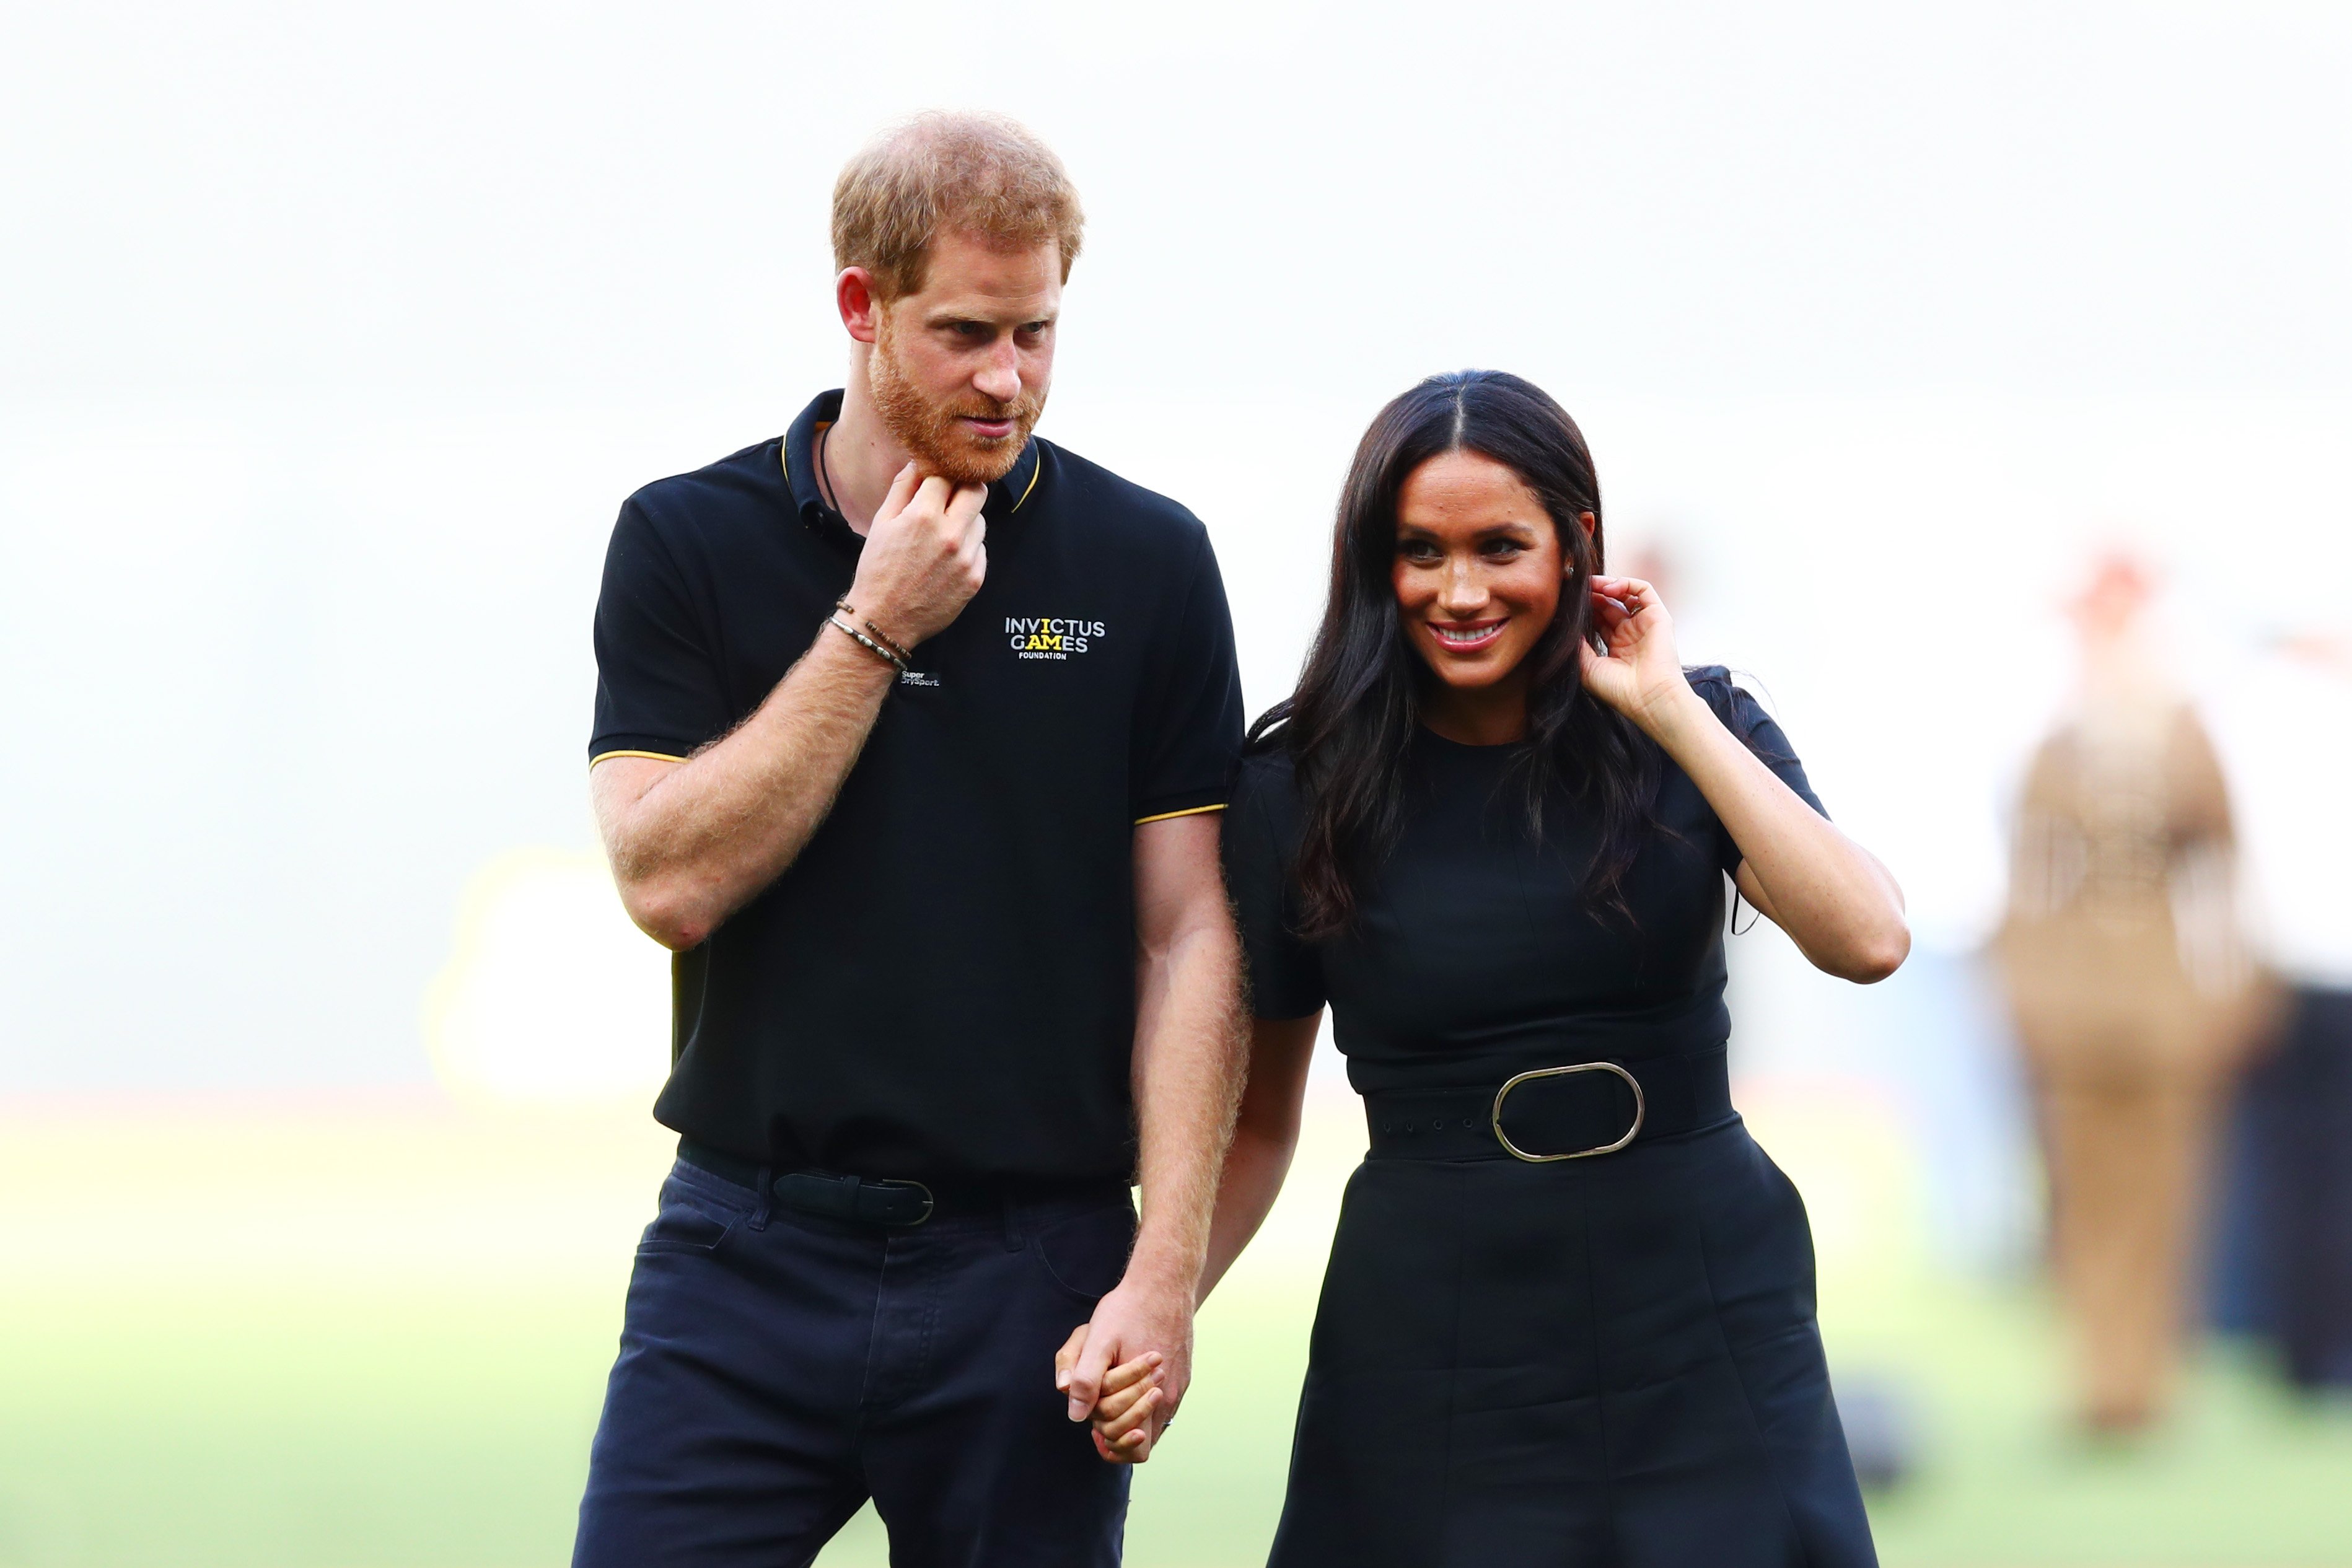 Prince Harry and Meghan Markle hold hands during the Invictus Games.